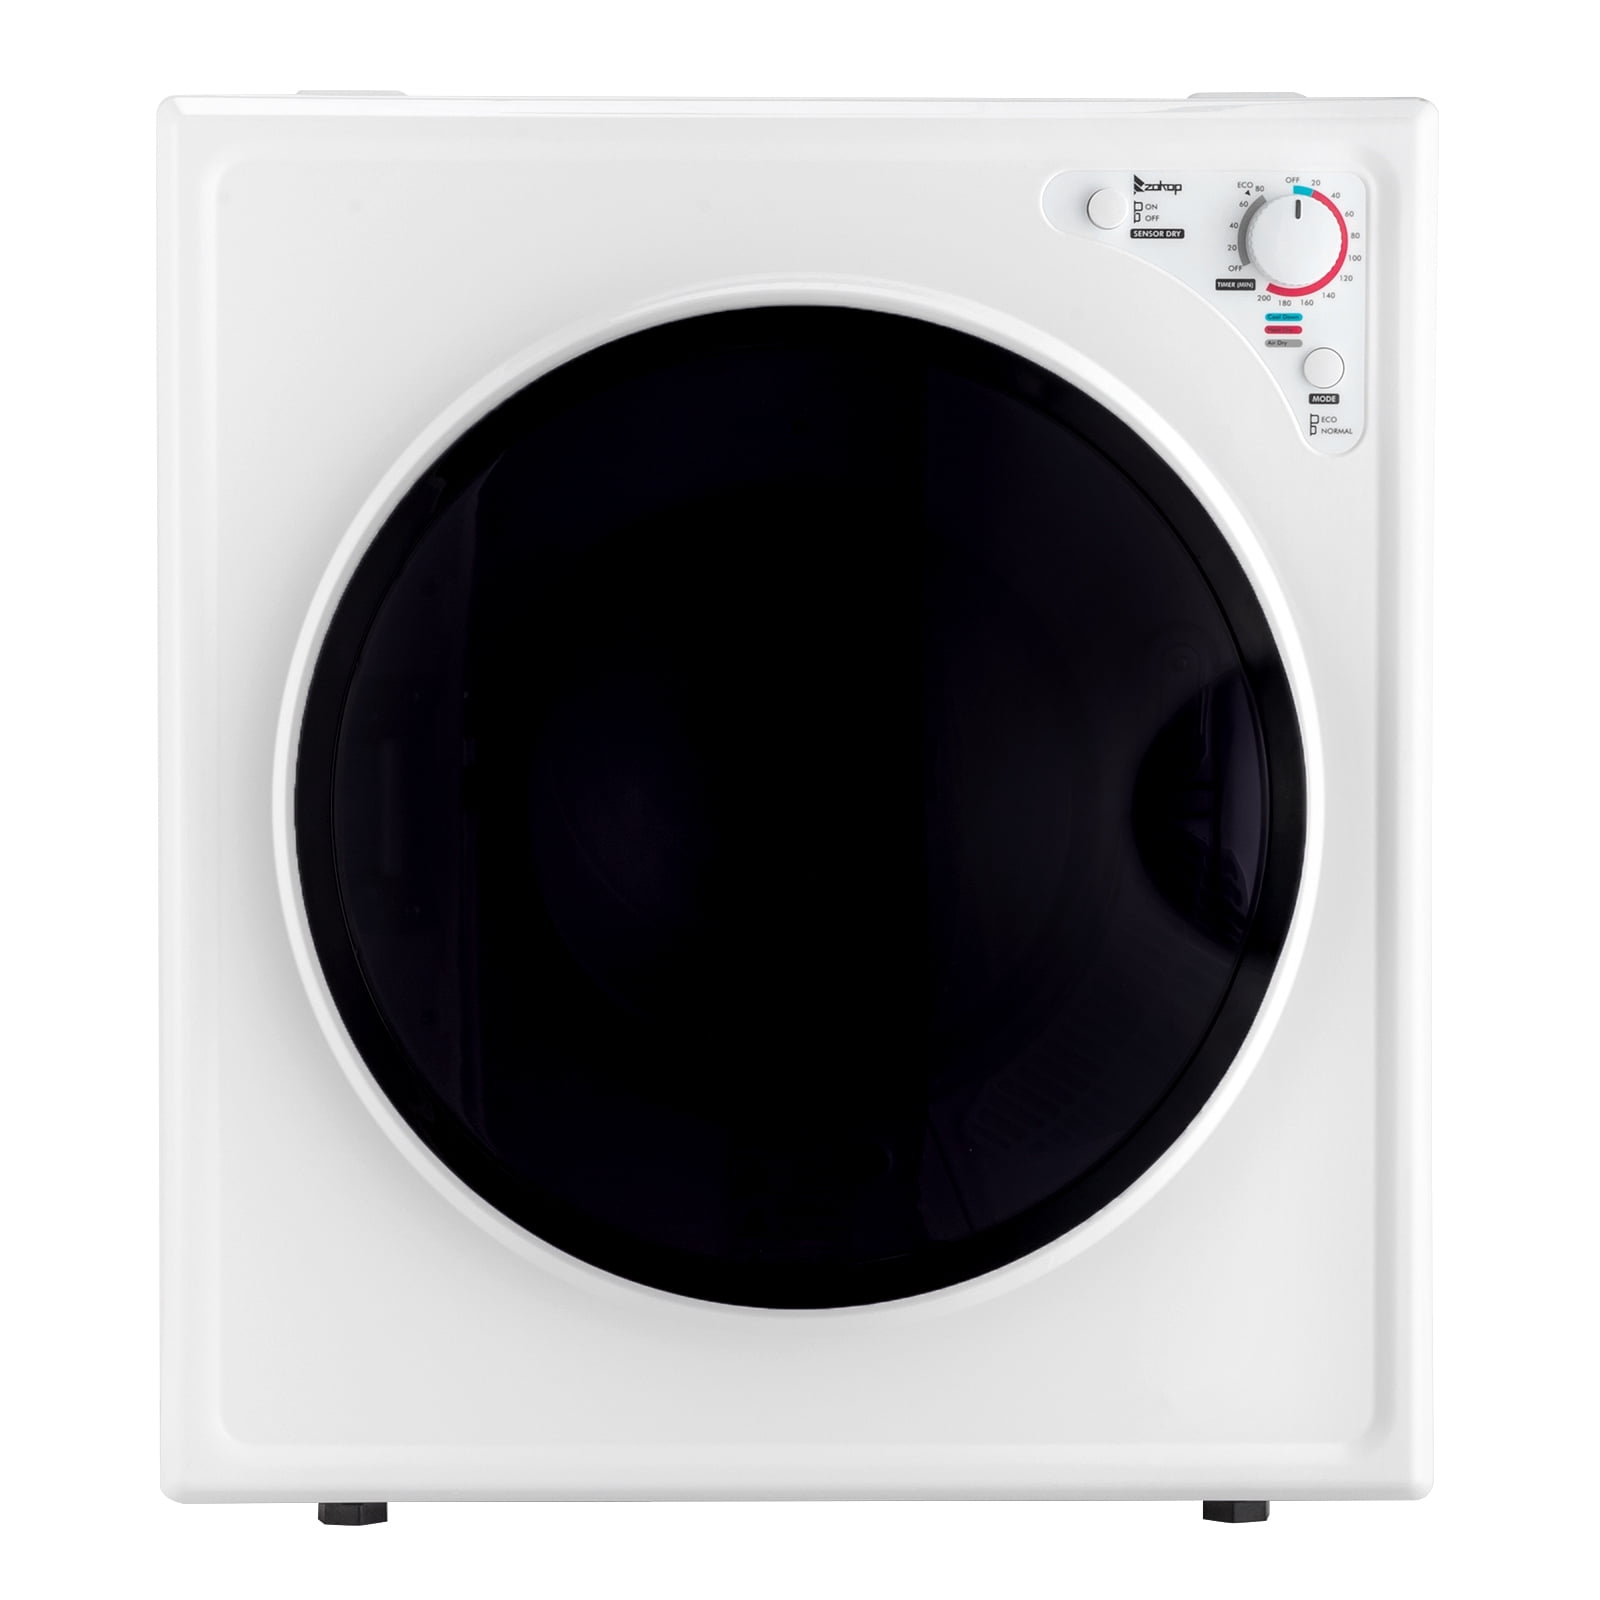 Barton 2.6 Cu. ft. Portable Electric Dryer Stainless Steel Tumble with Automatic Drying Mode 8.8 lbs. Capacity in White